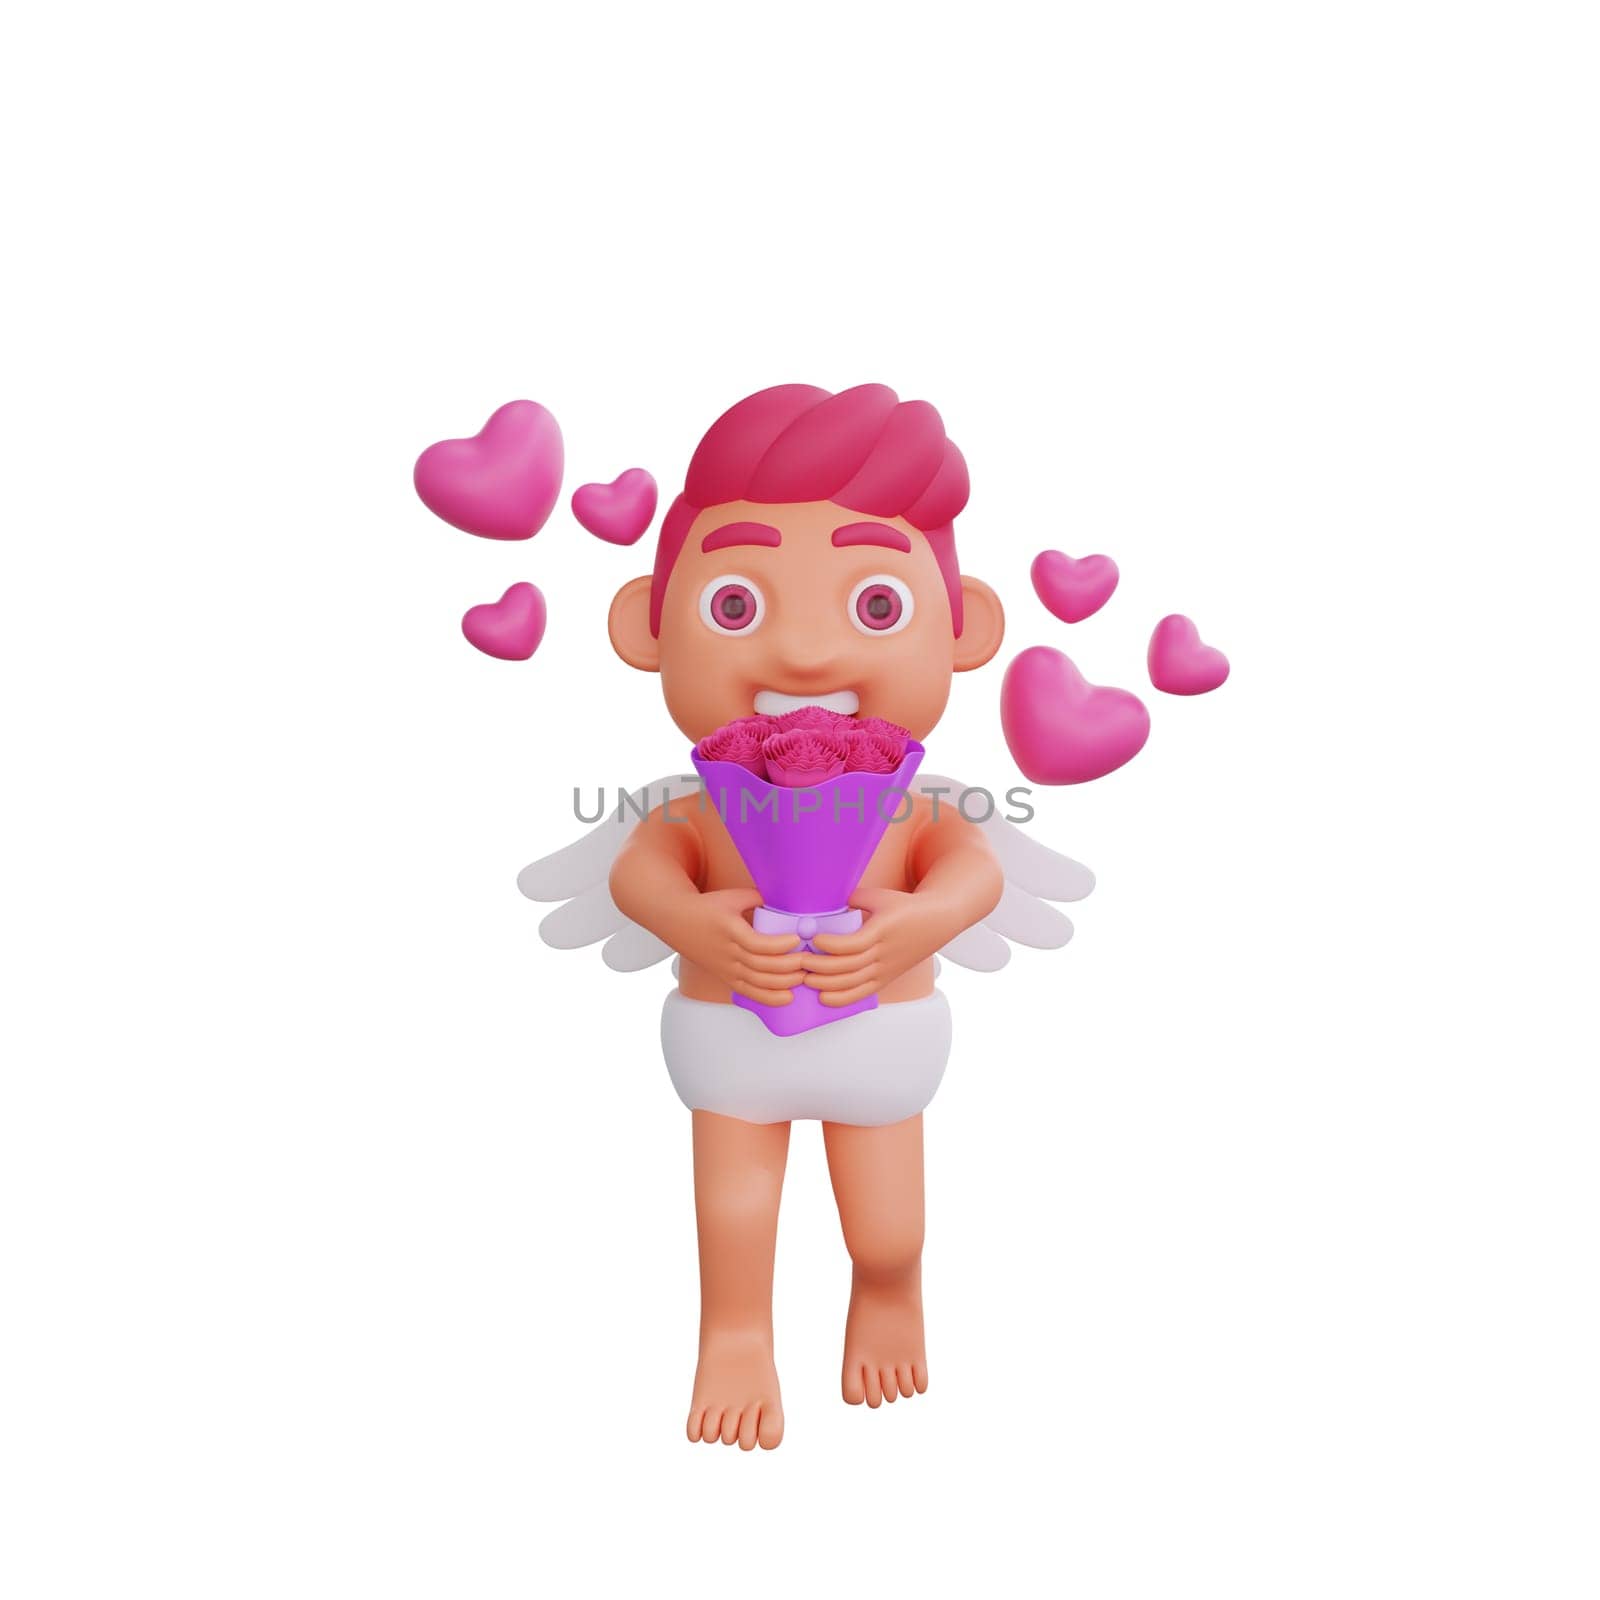 3D illustration of Valentine Cupid character holding a bouquet of roses surrounded by floating hearts, perfect for Valentine or love themed projects